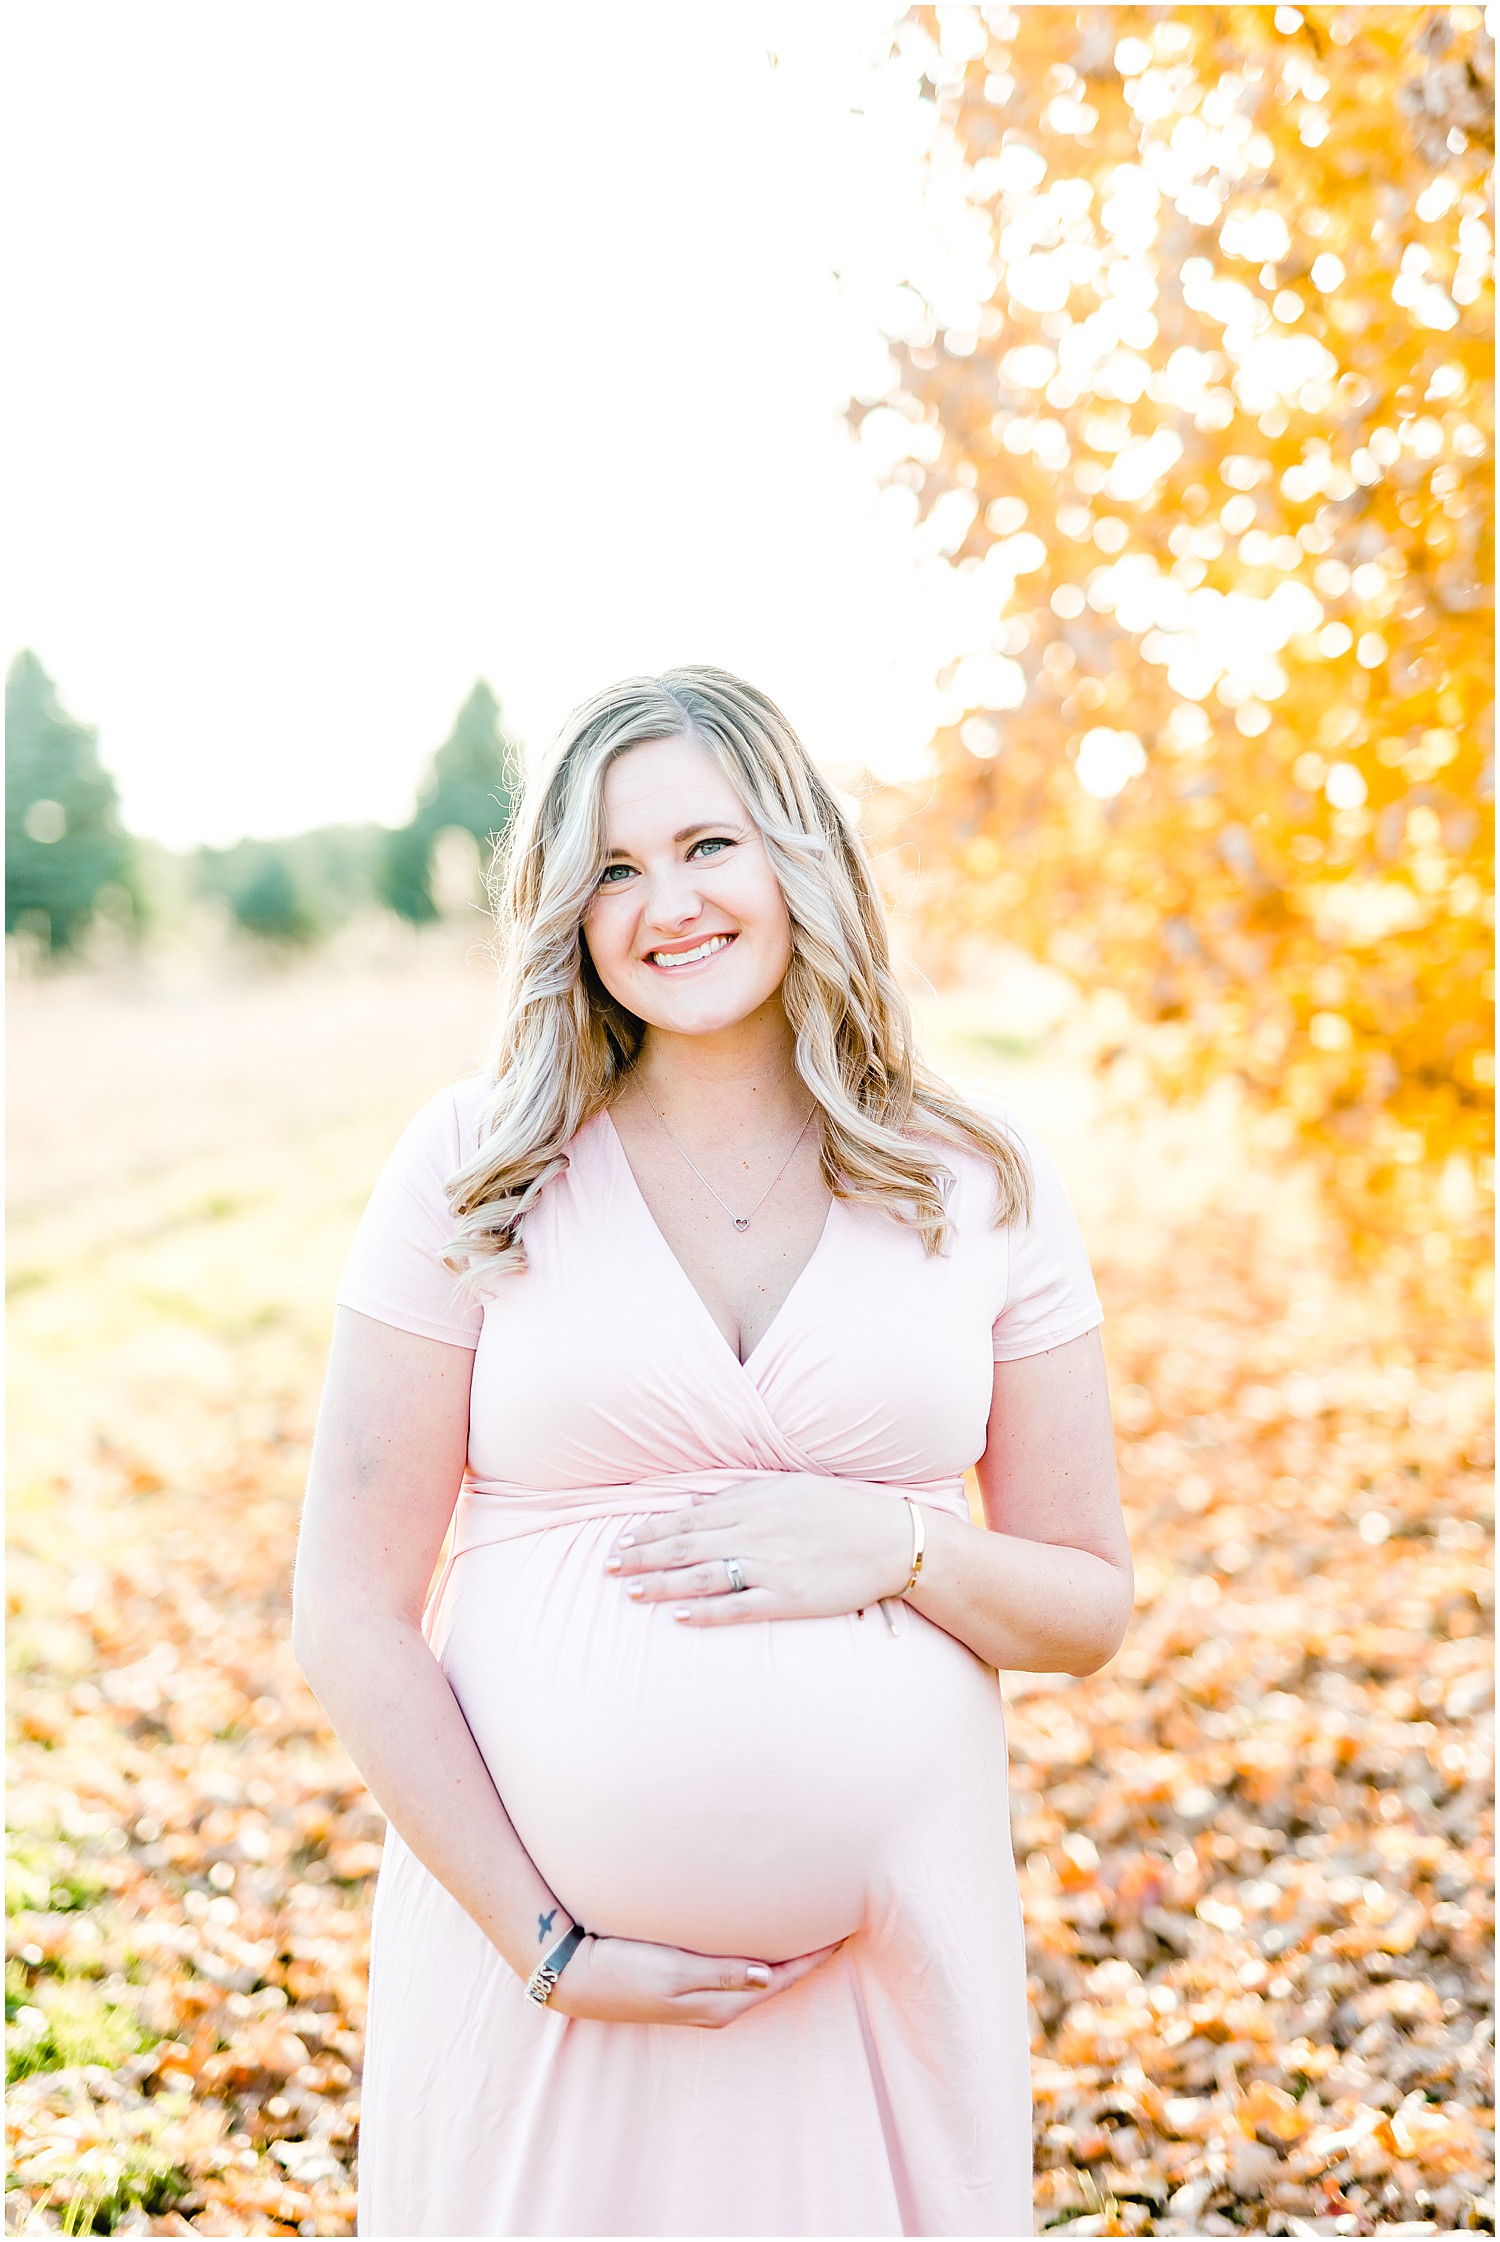 pink dress maternity session expecting mom by tree